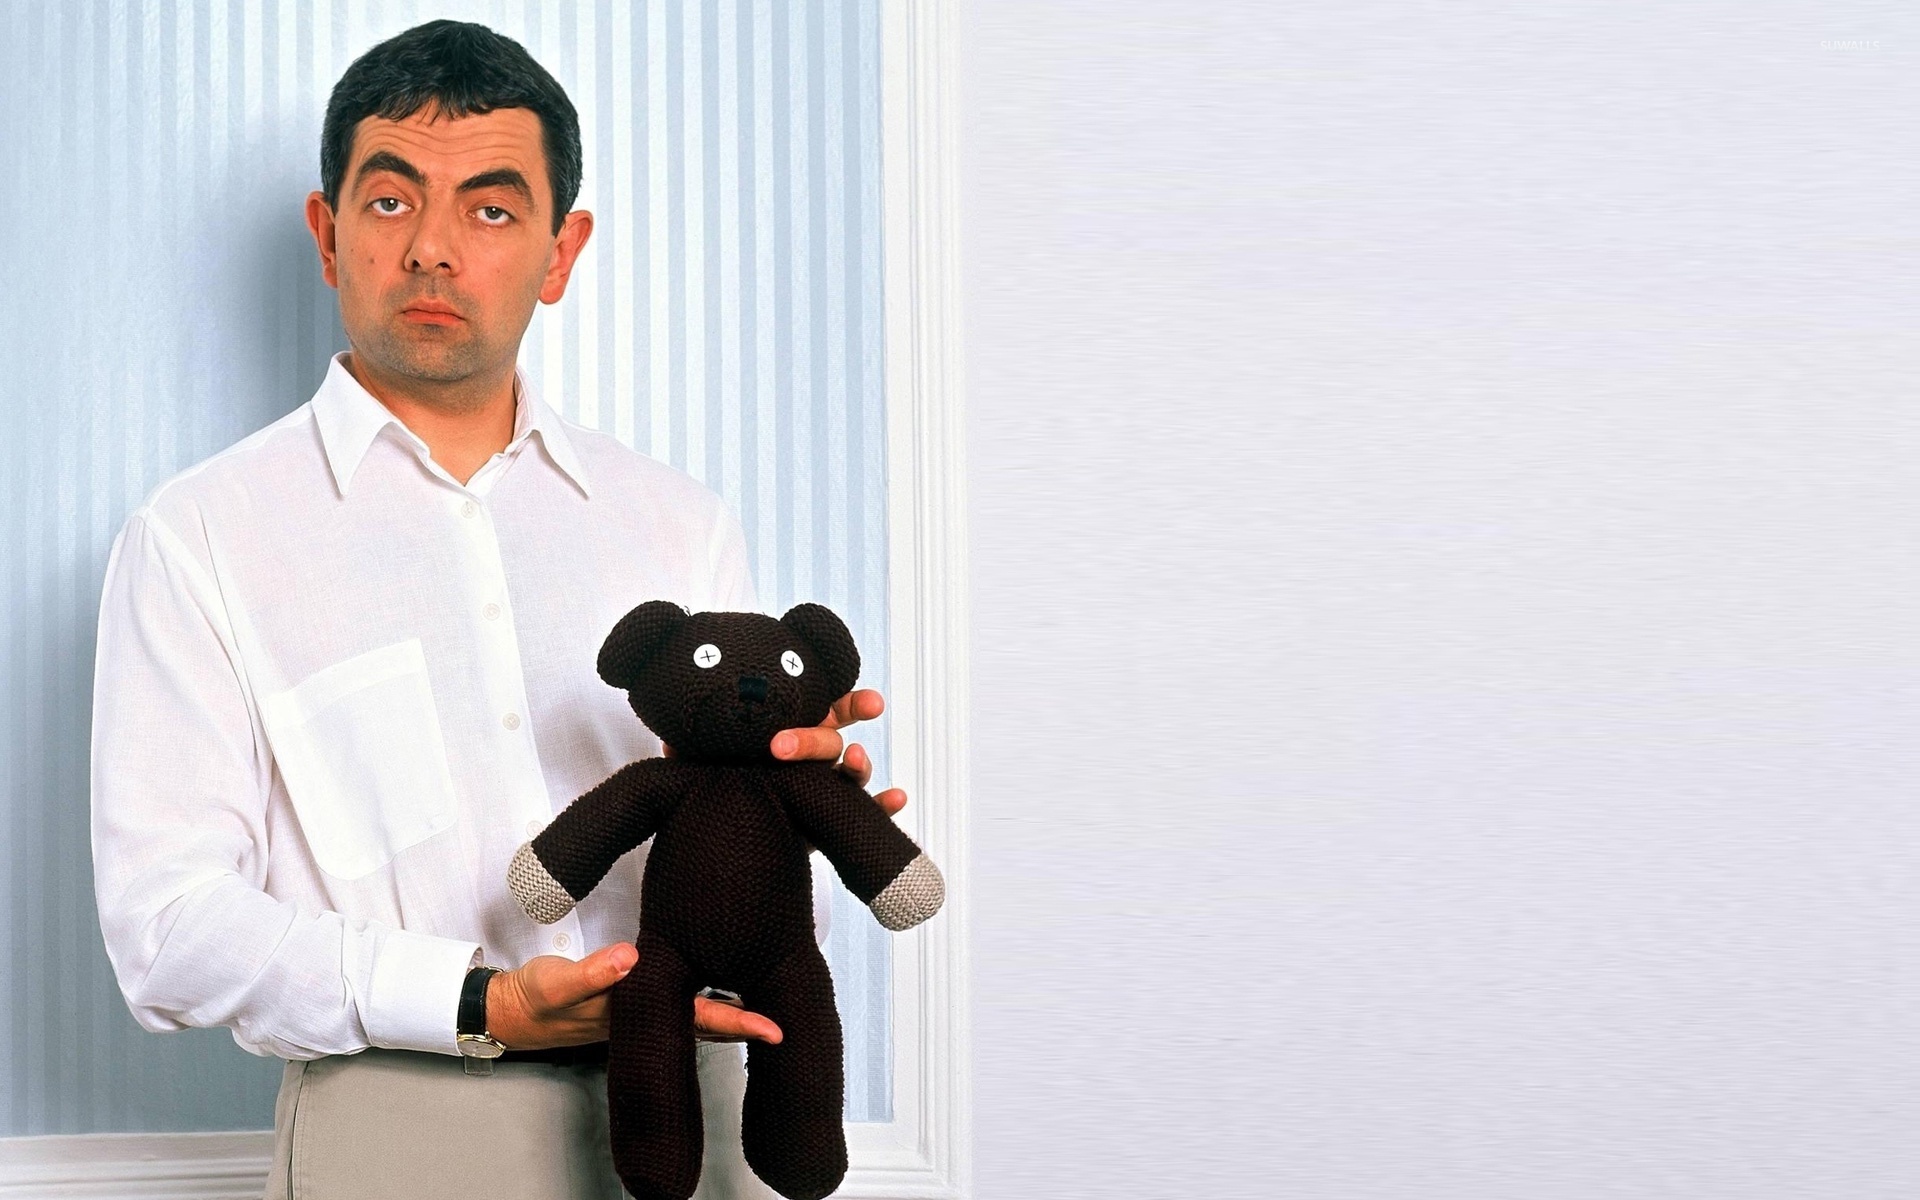 mr bean and his teddy